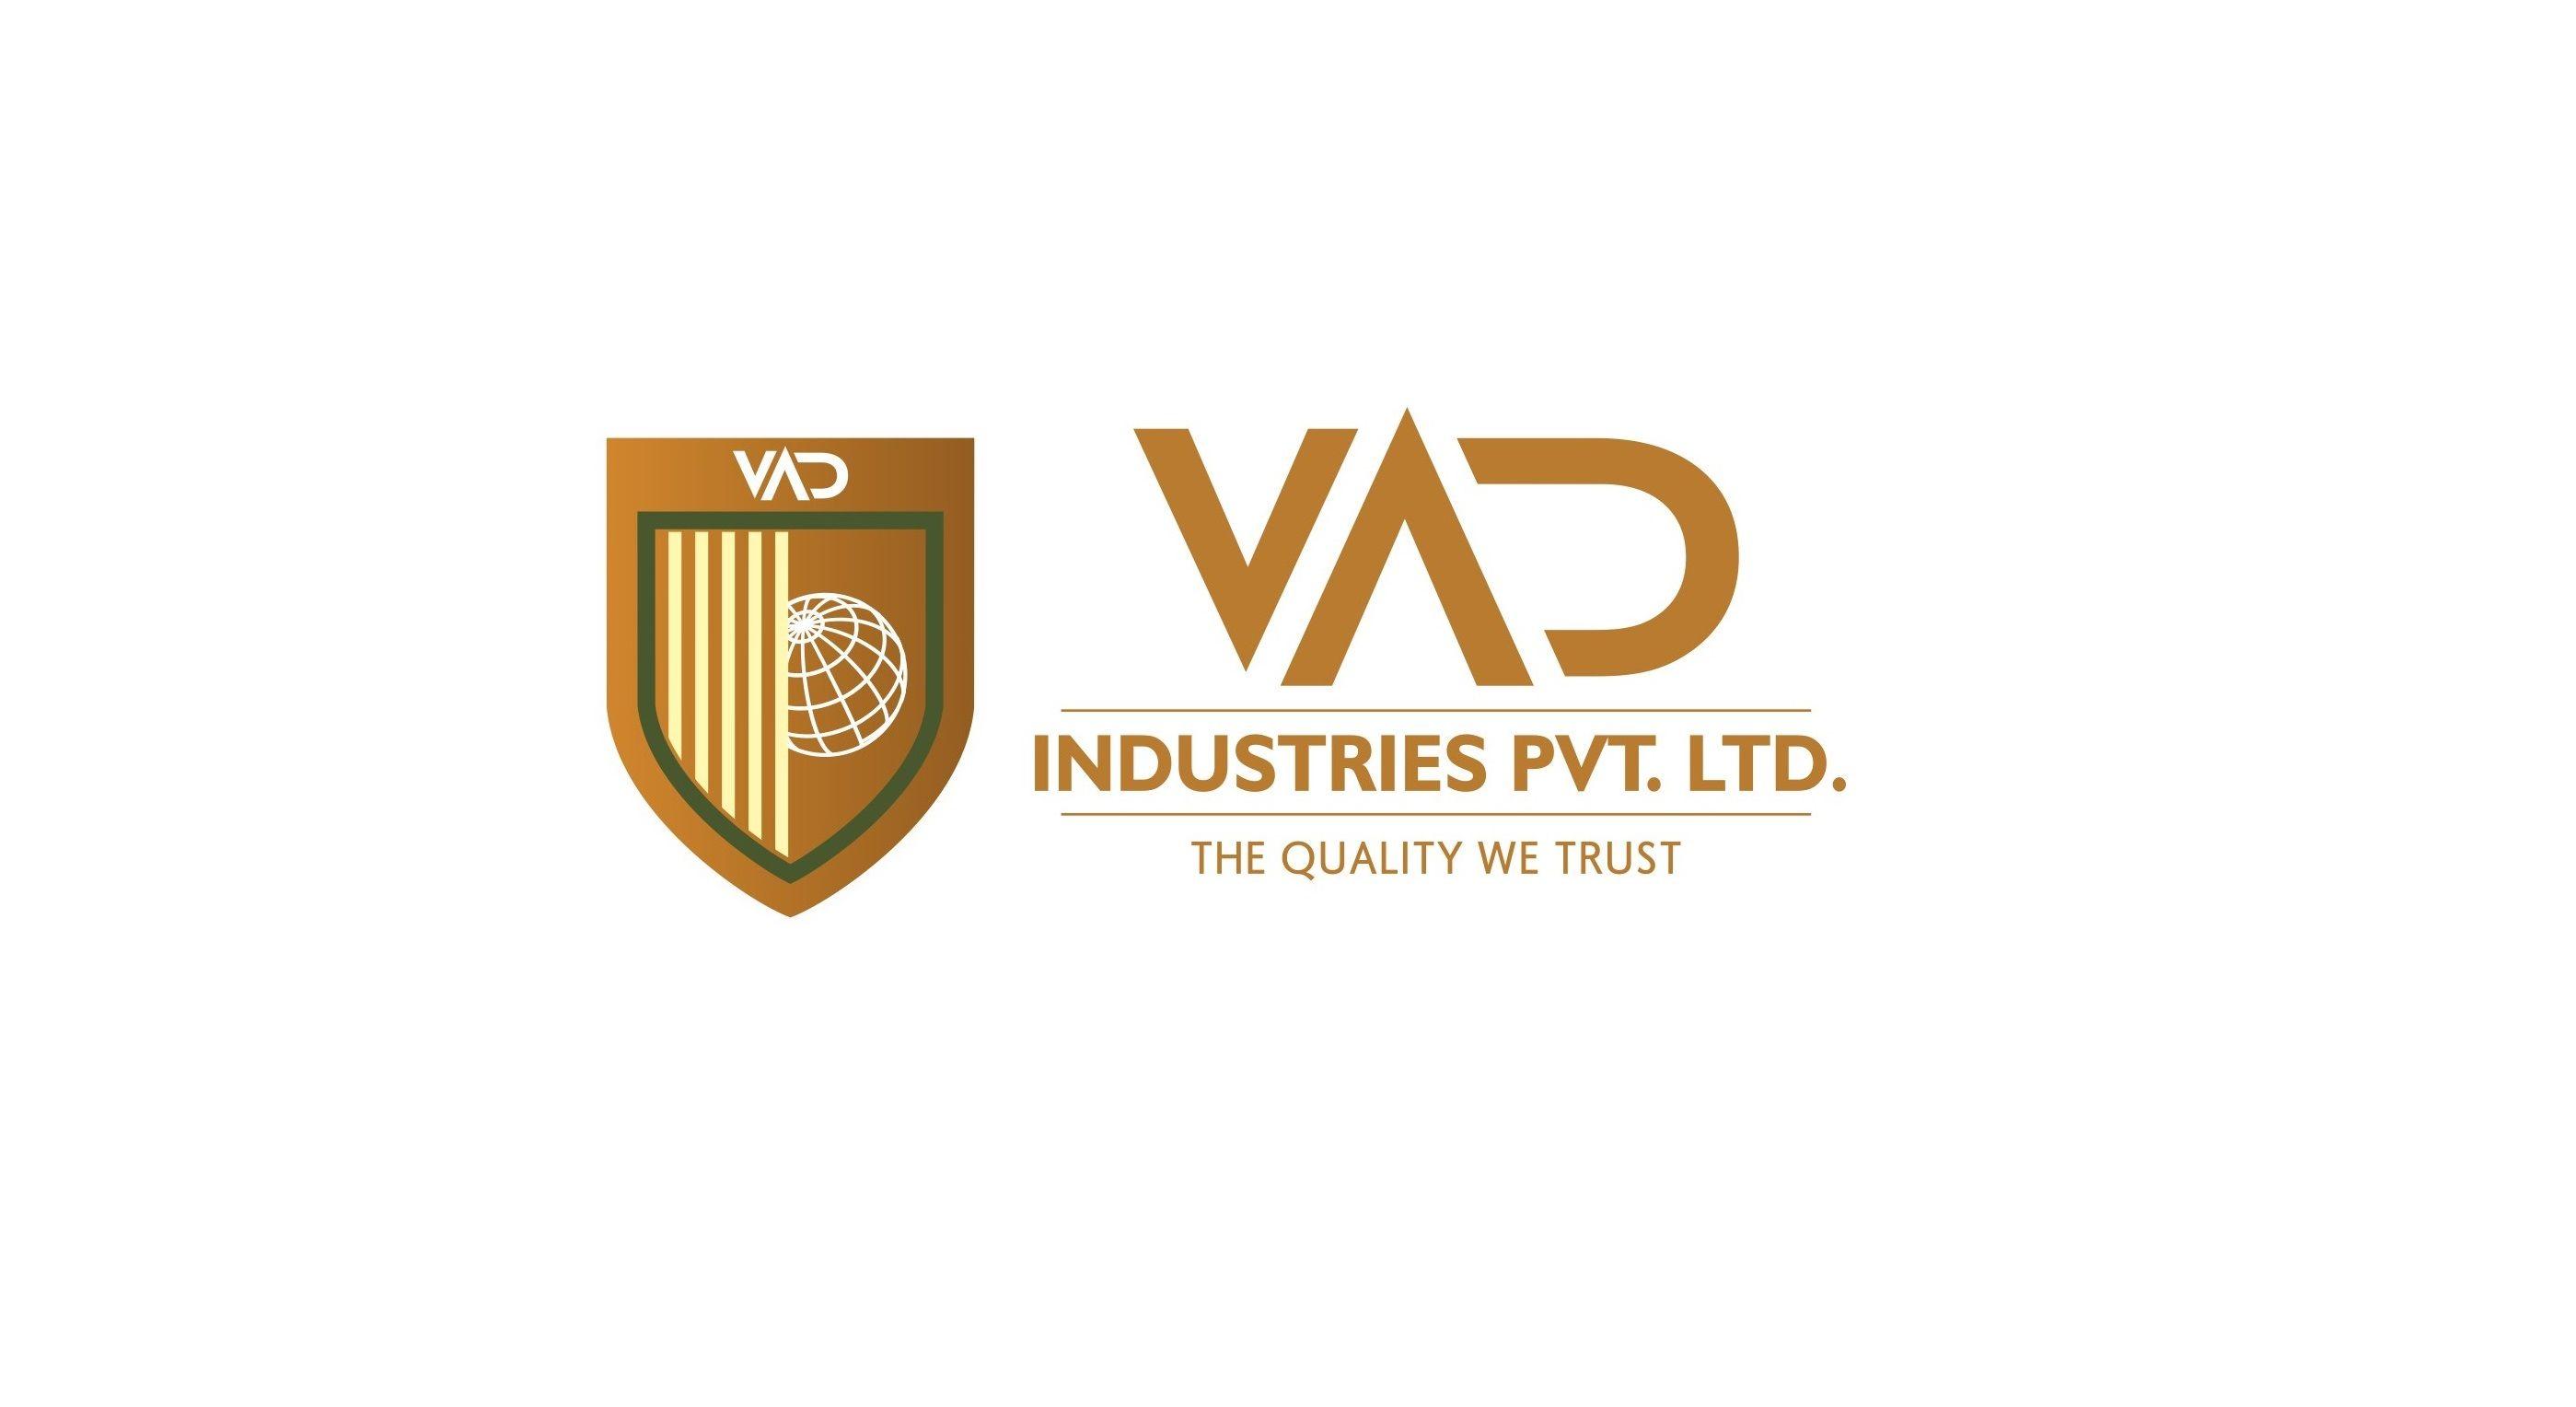 VAD INDUSTRIES PRIVATE LIMITED